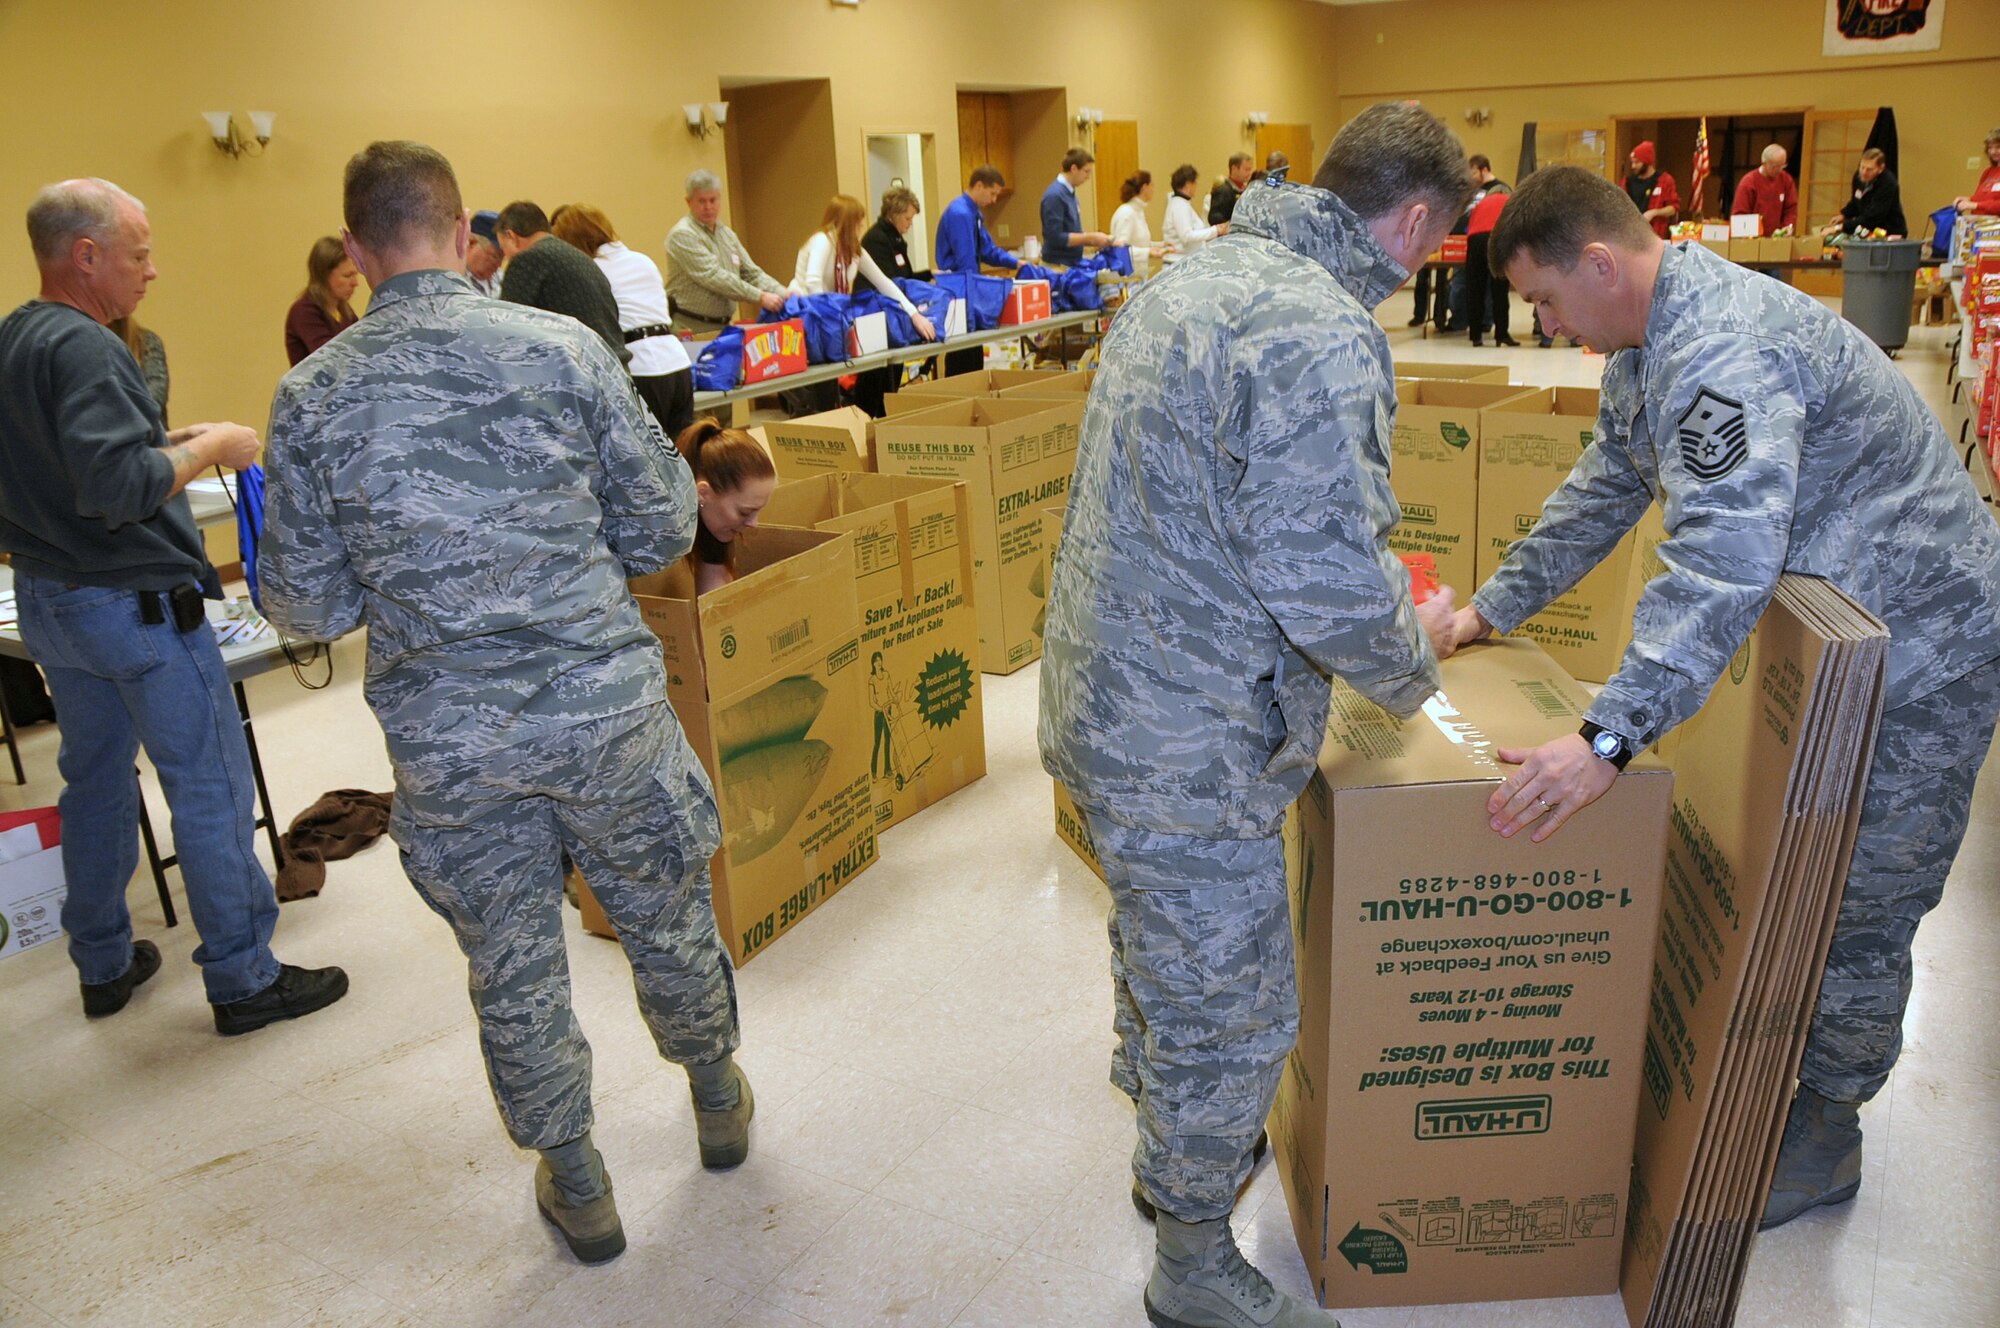 OFFUTT AIR FORCE BASE, Neb. - Volunteers join ranks to fill holiday cheer bags for the Bellevue Chamber of Commerce on Dec. 13. Military members and civilians were on hand to fill snack bags up for local dorm residents at Offutt. U.S. Air Force Photo by Jeff W. Gates (Released)